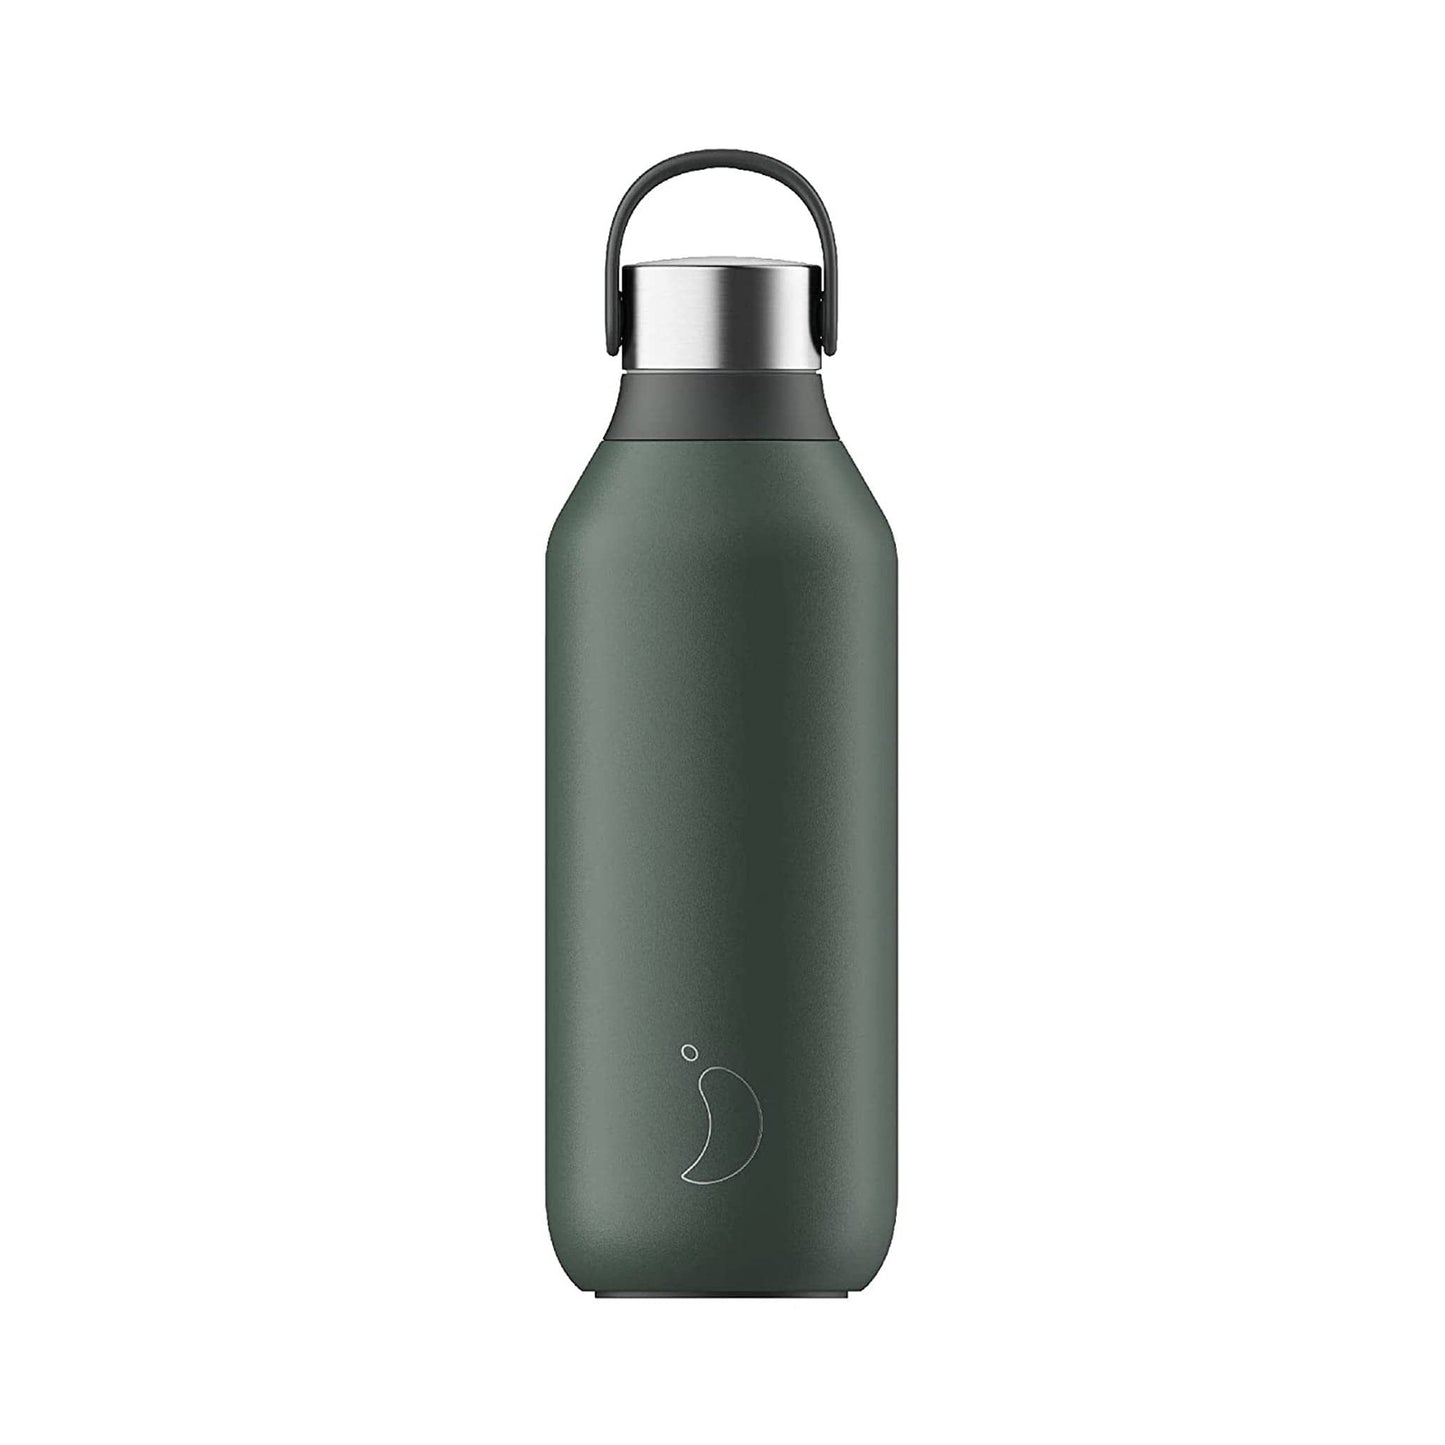 Chilly's Water Bottles Chilly’s 500ml Series 2 Stainless Steel Water Bottle - Pine Green